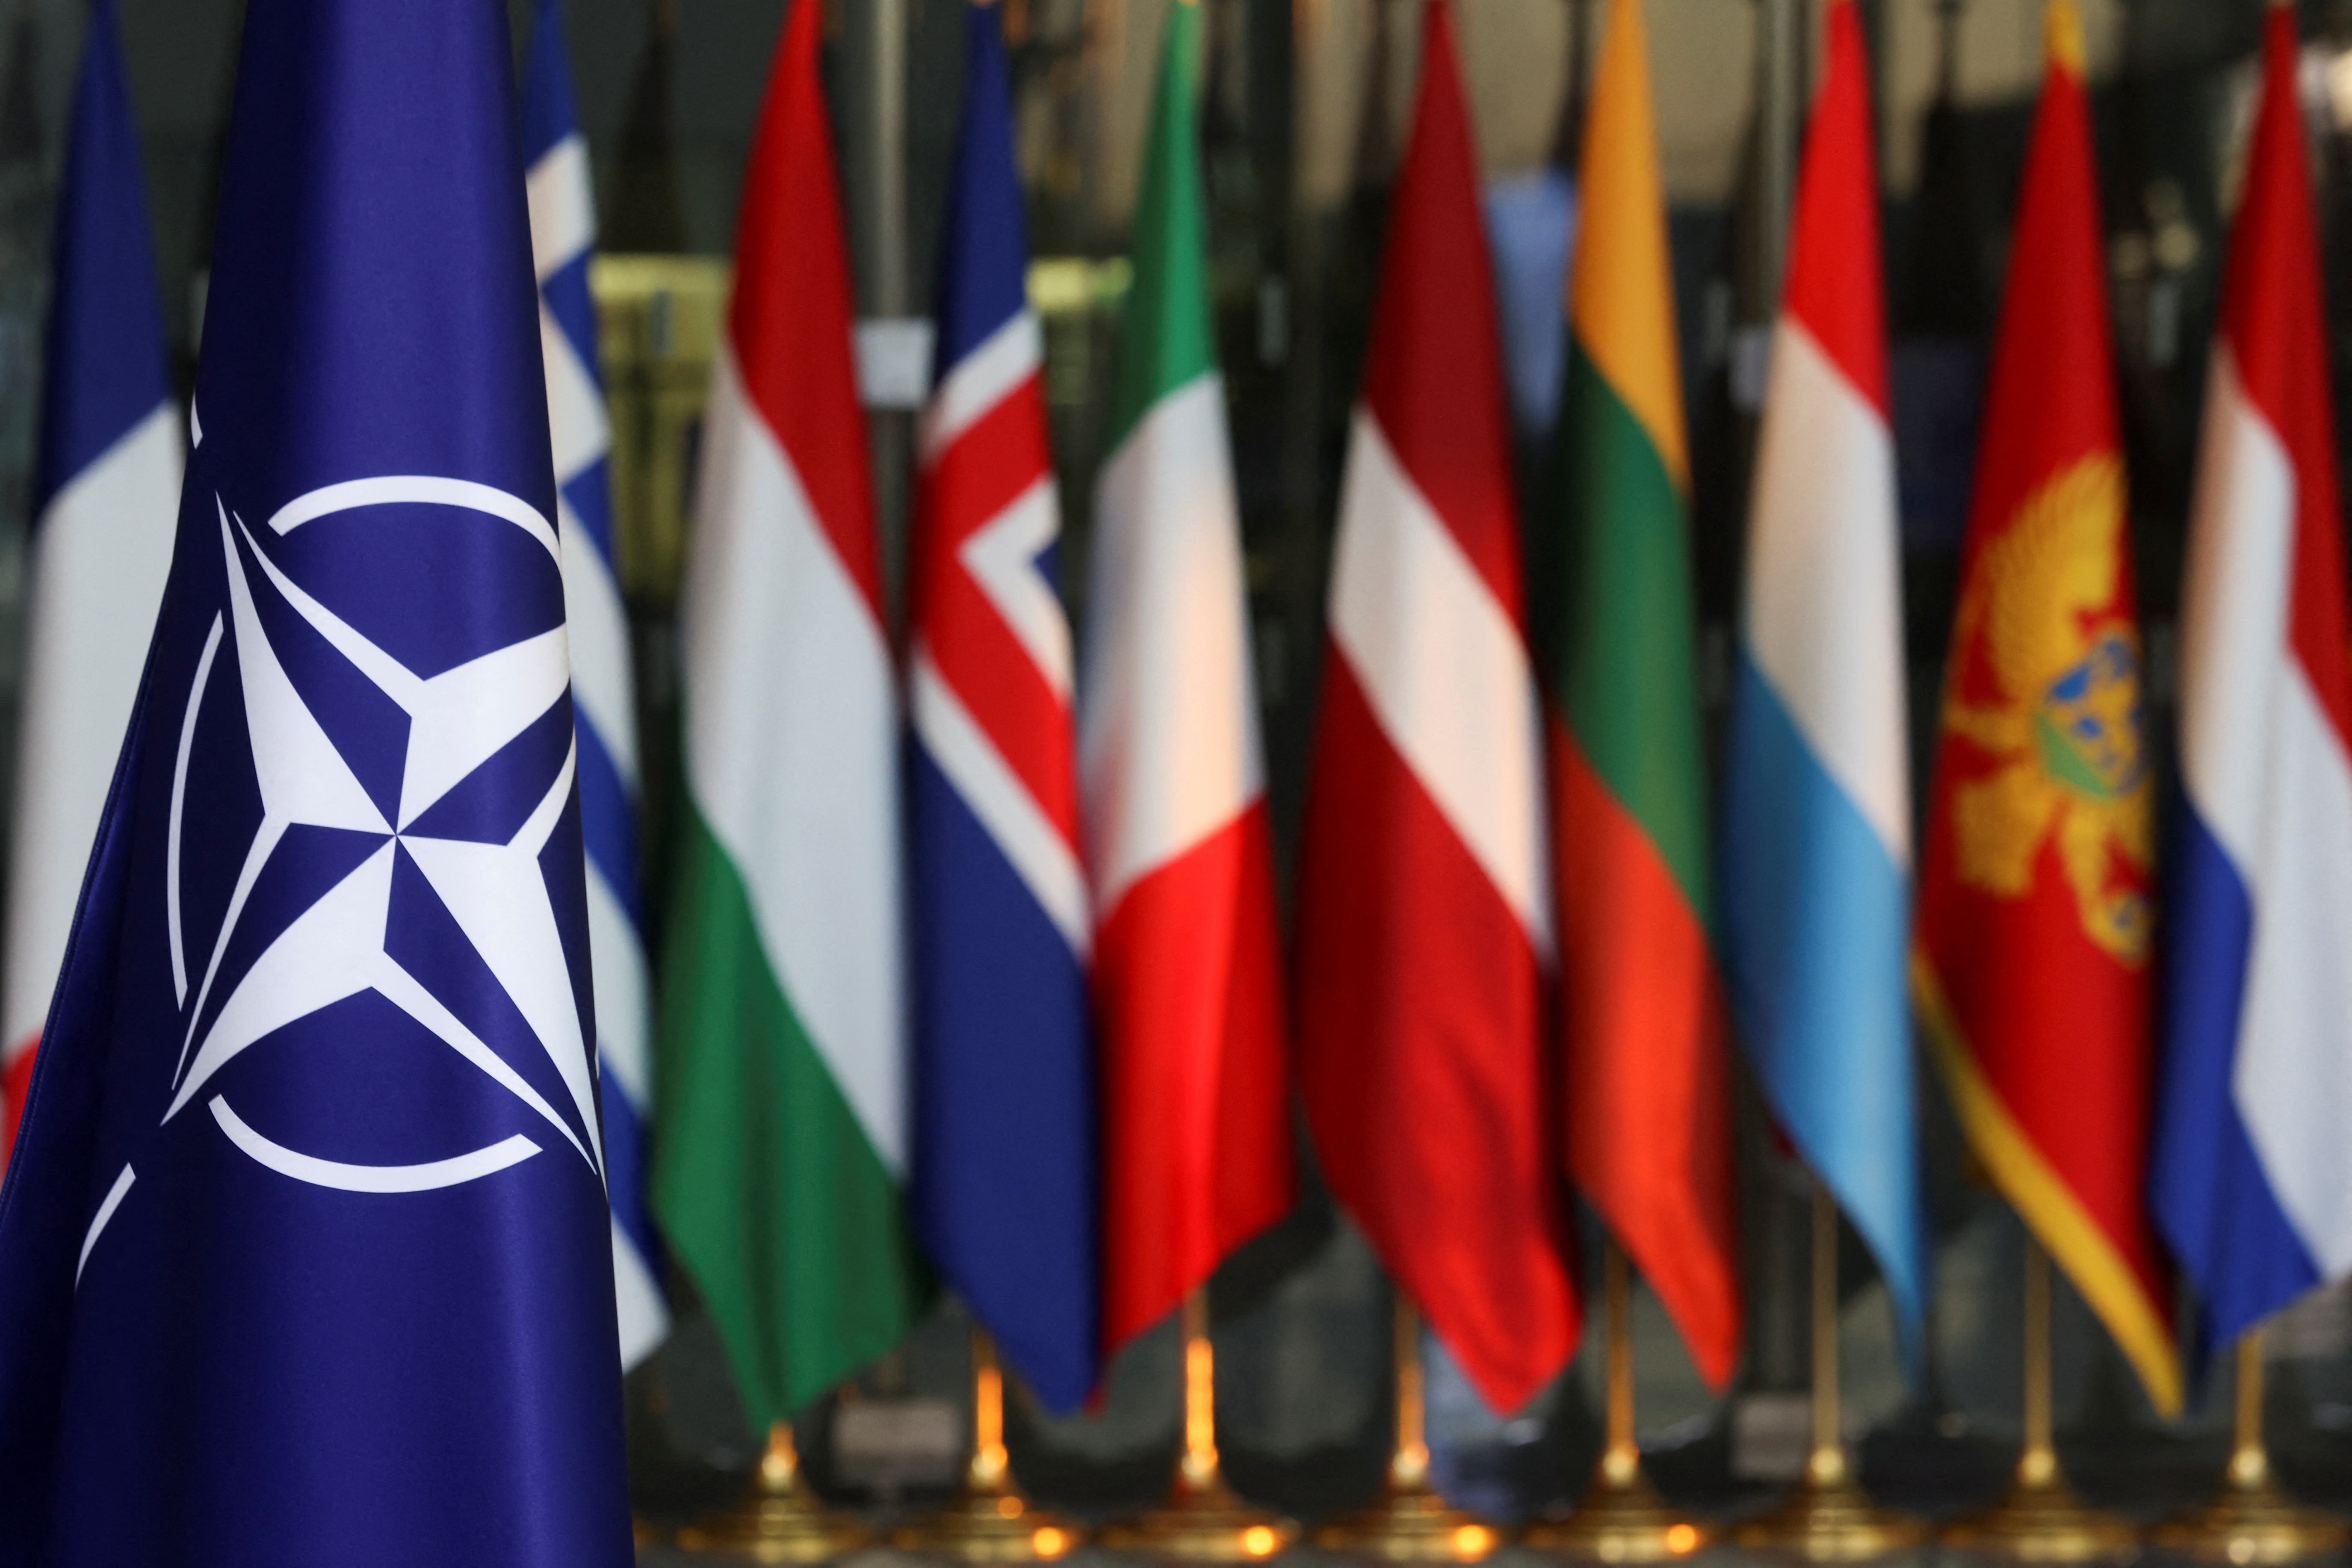 NATO meeting of foreign ministers, in Brussels